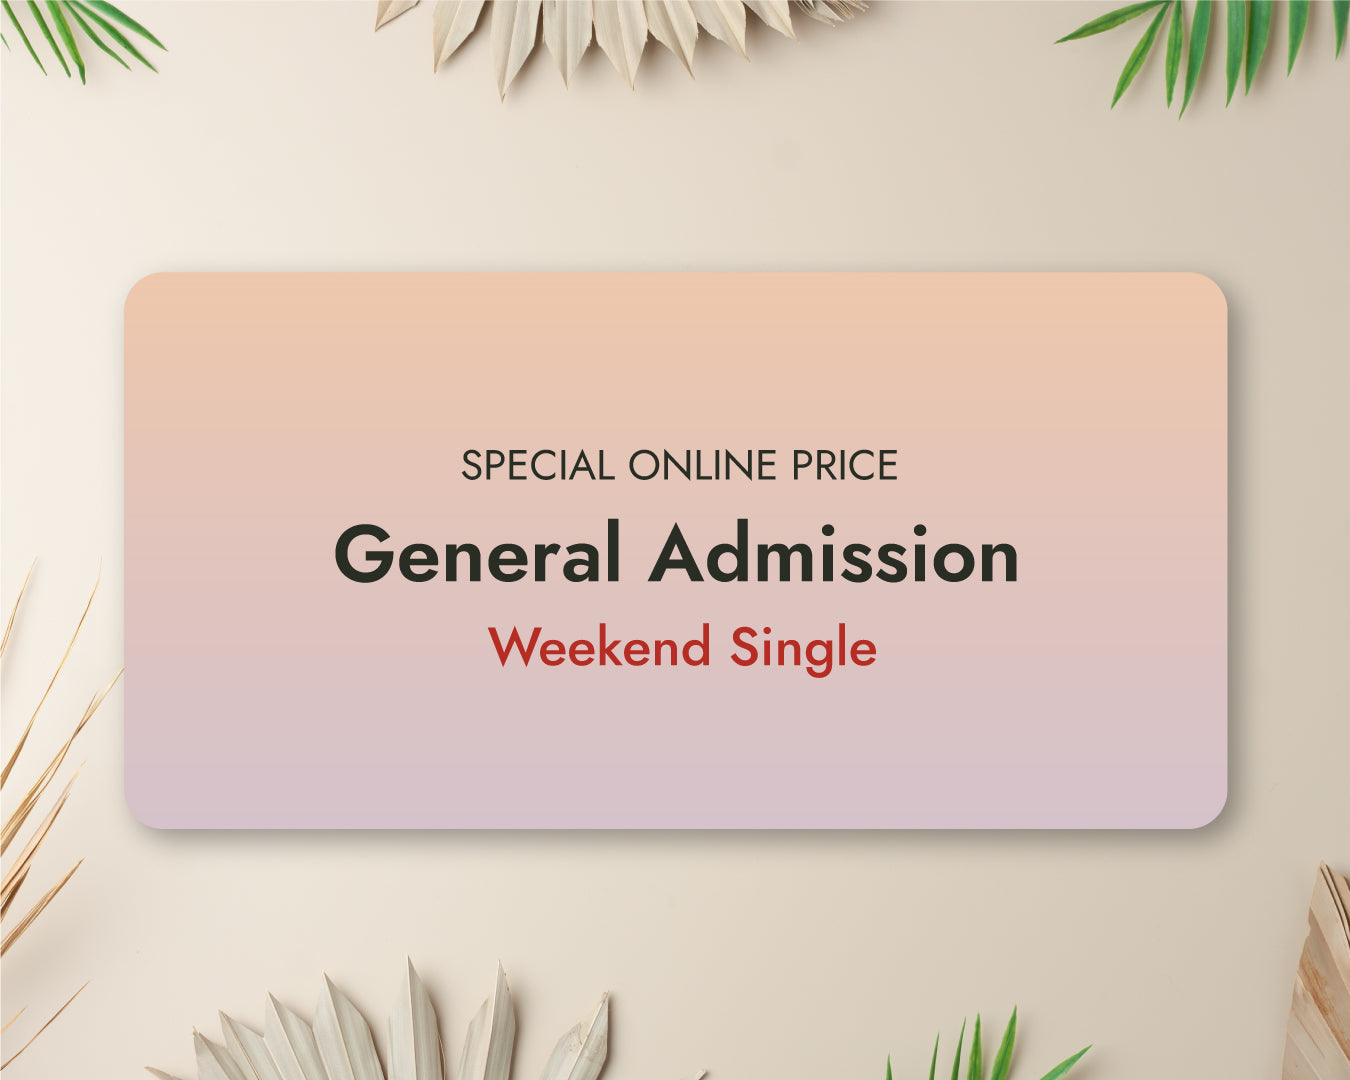 Weekend(Any Day) General Admission for One